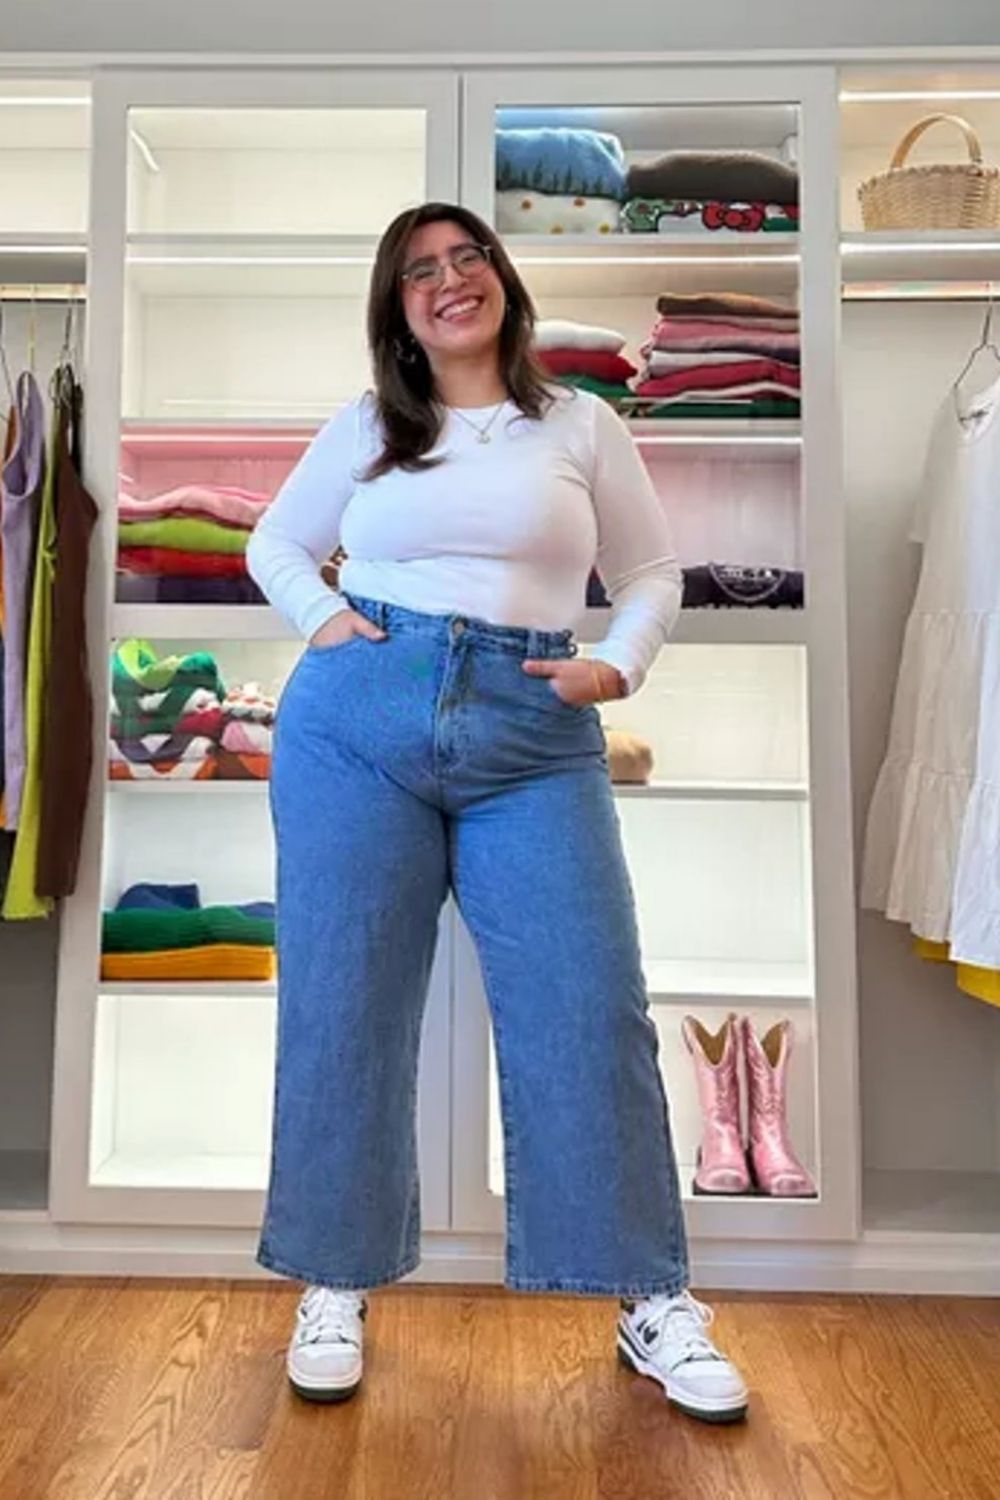 Featuring classic high-waisted wide-leg jeans, creating a flattering silhouette by elongating the legs, paired with a fitted white top that balances proportions nicely. Clean white sneakers add a casual, contemporary finish to the ensemble.